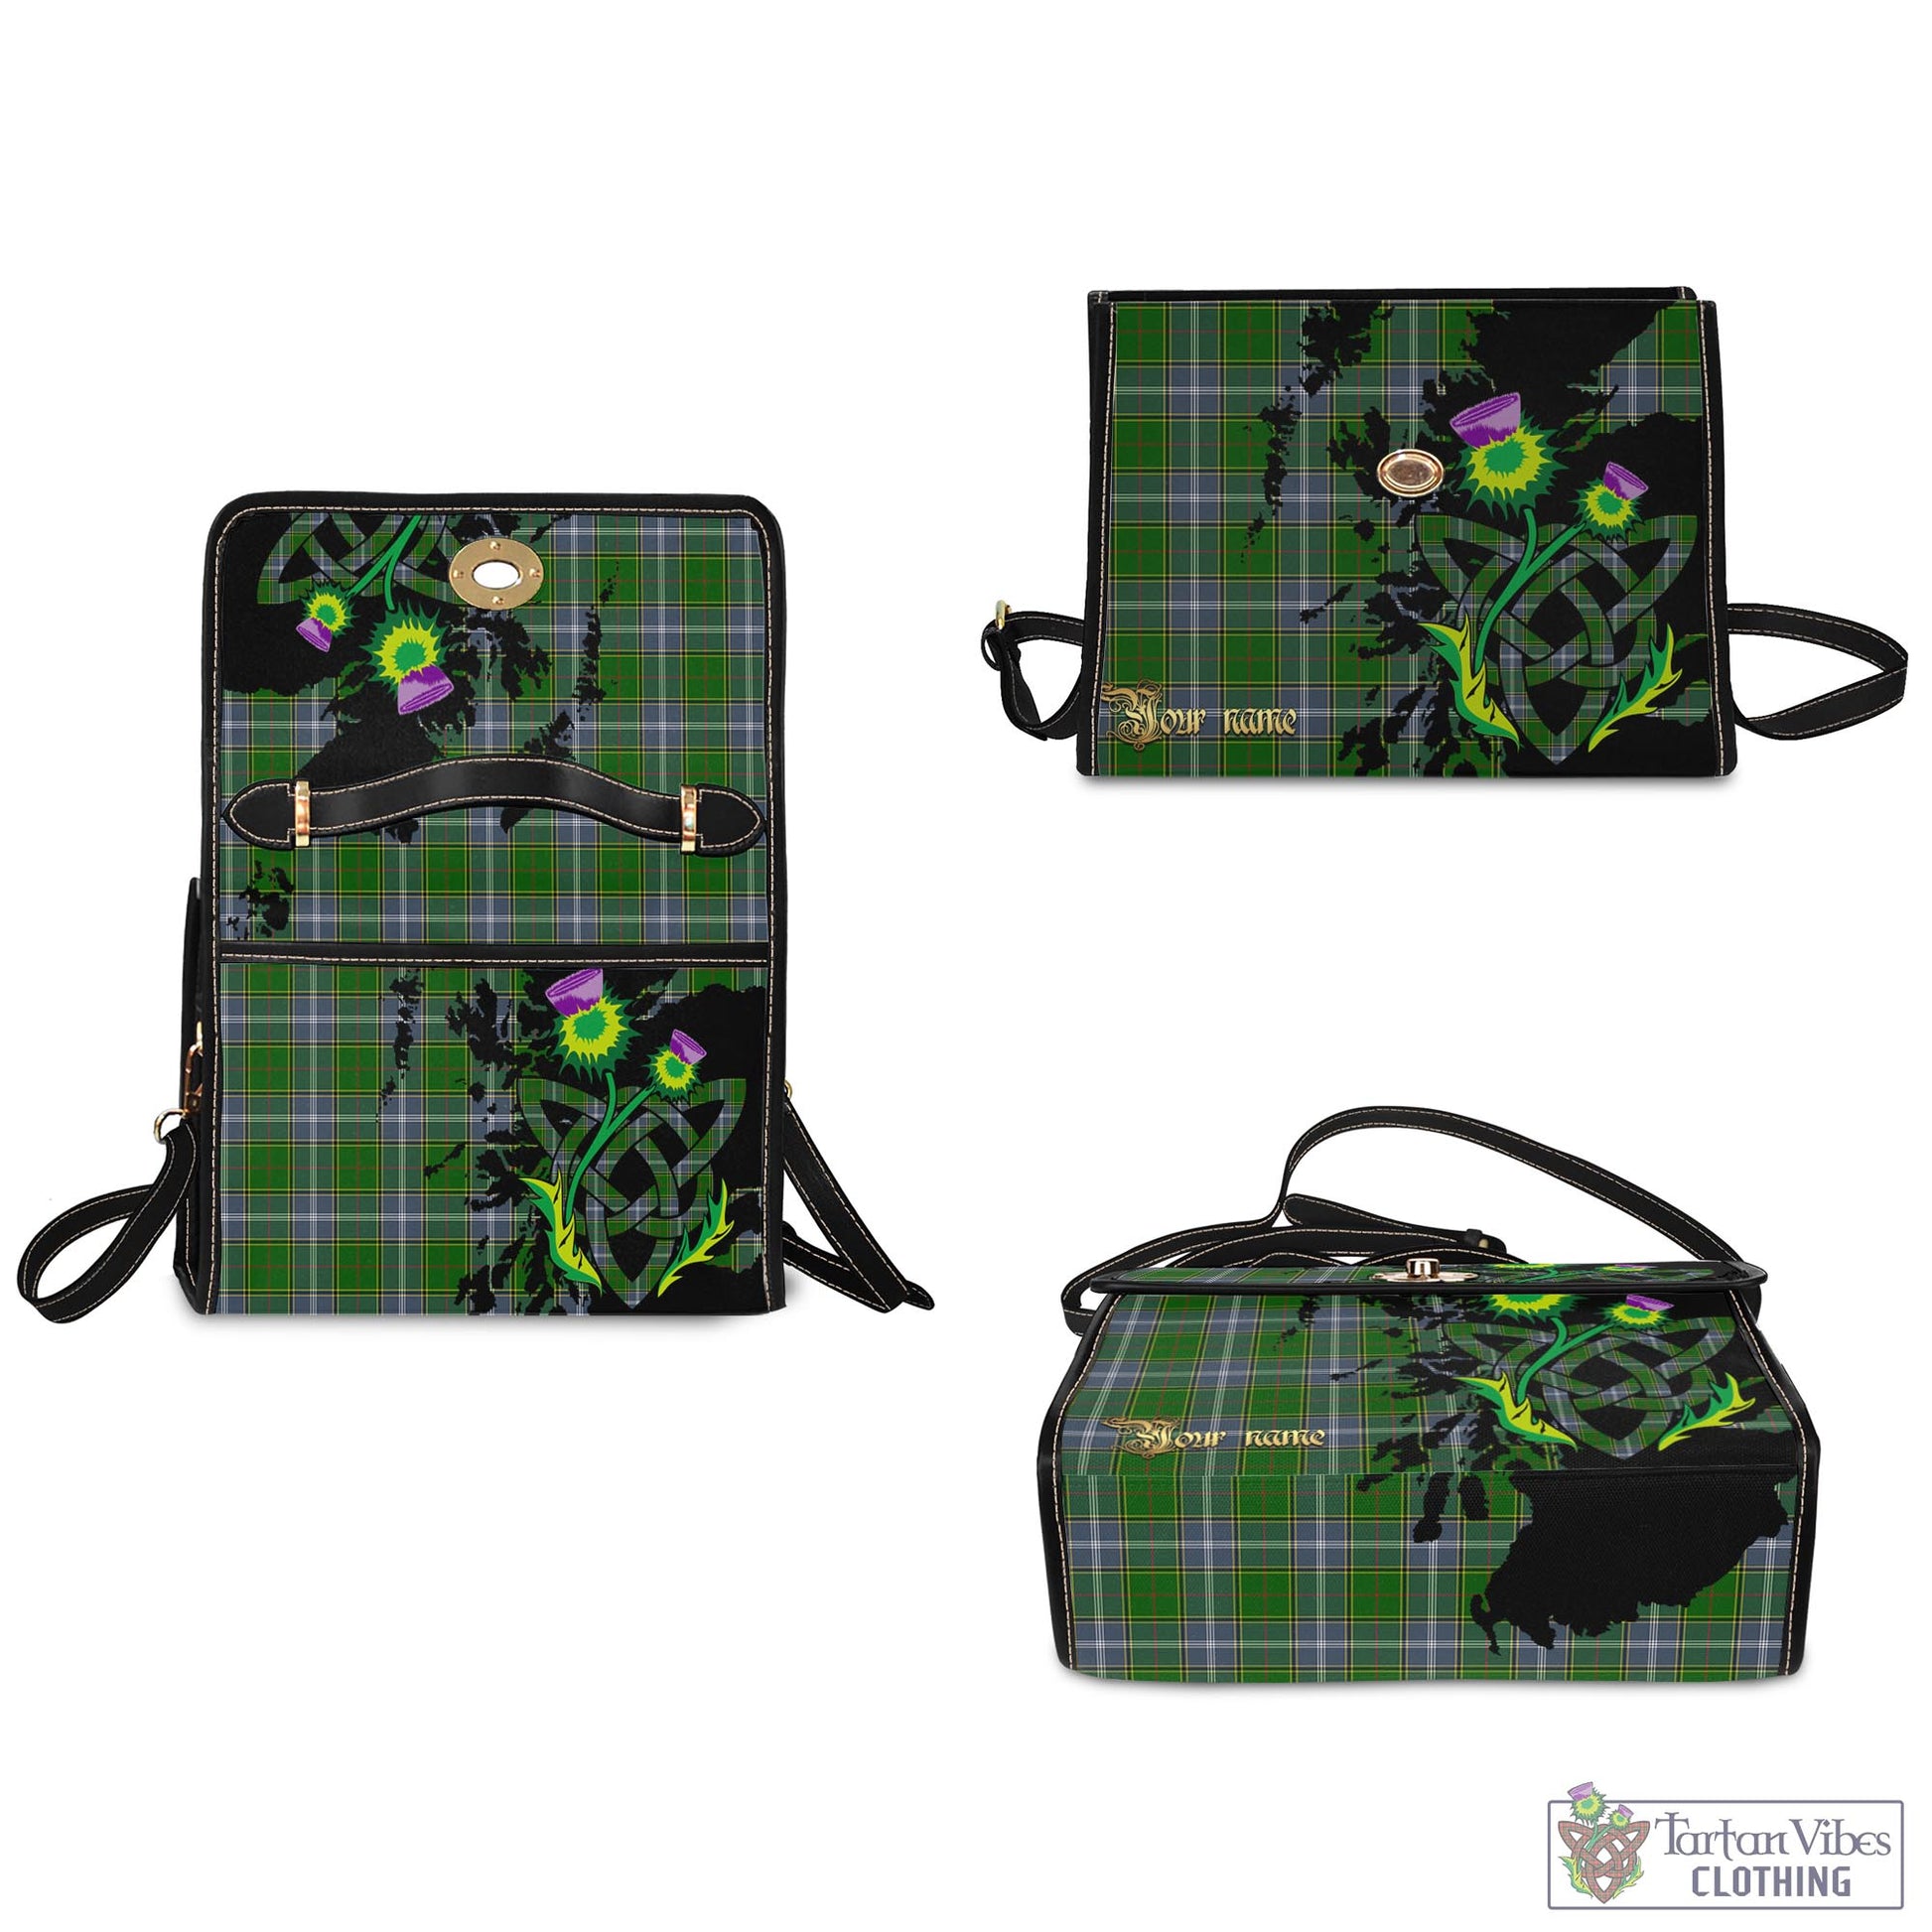 Tartan Vibes Clothing Pringle Tartan Waterproof Canvas Bag with Scotland Map and Thistle Celtic Accents